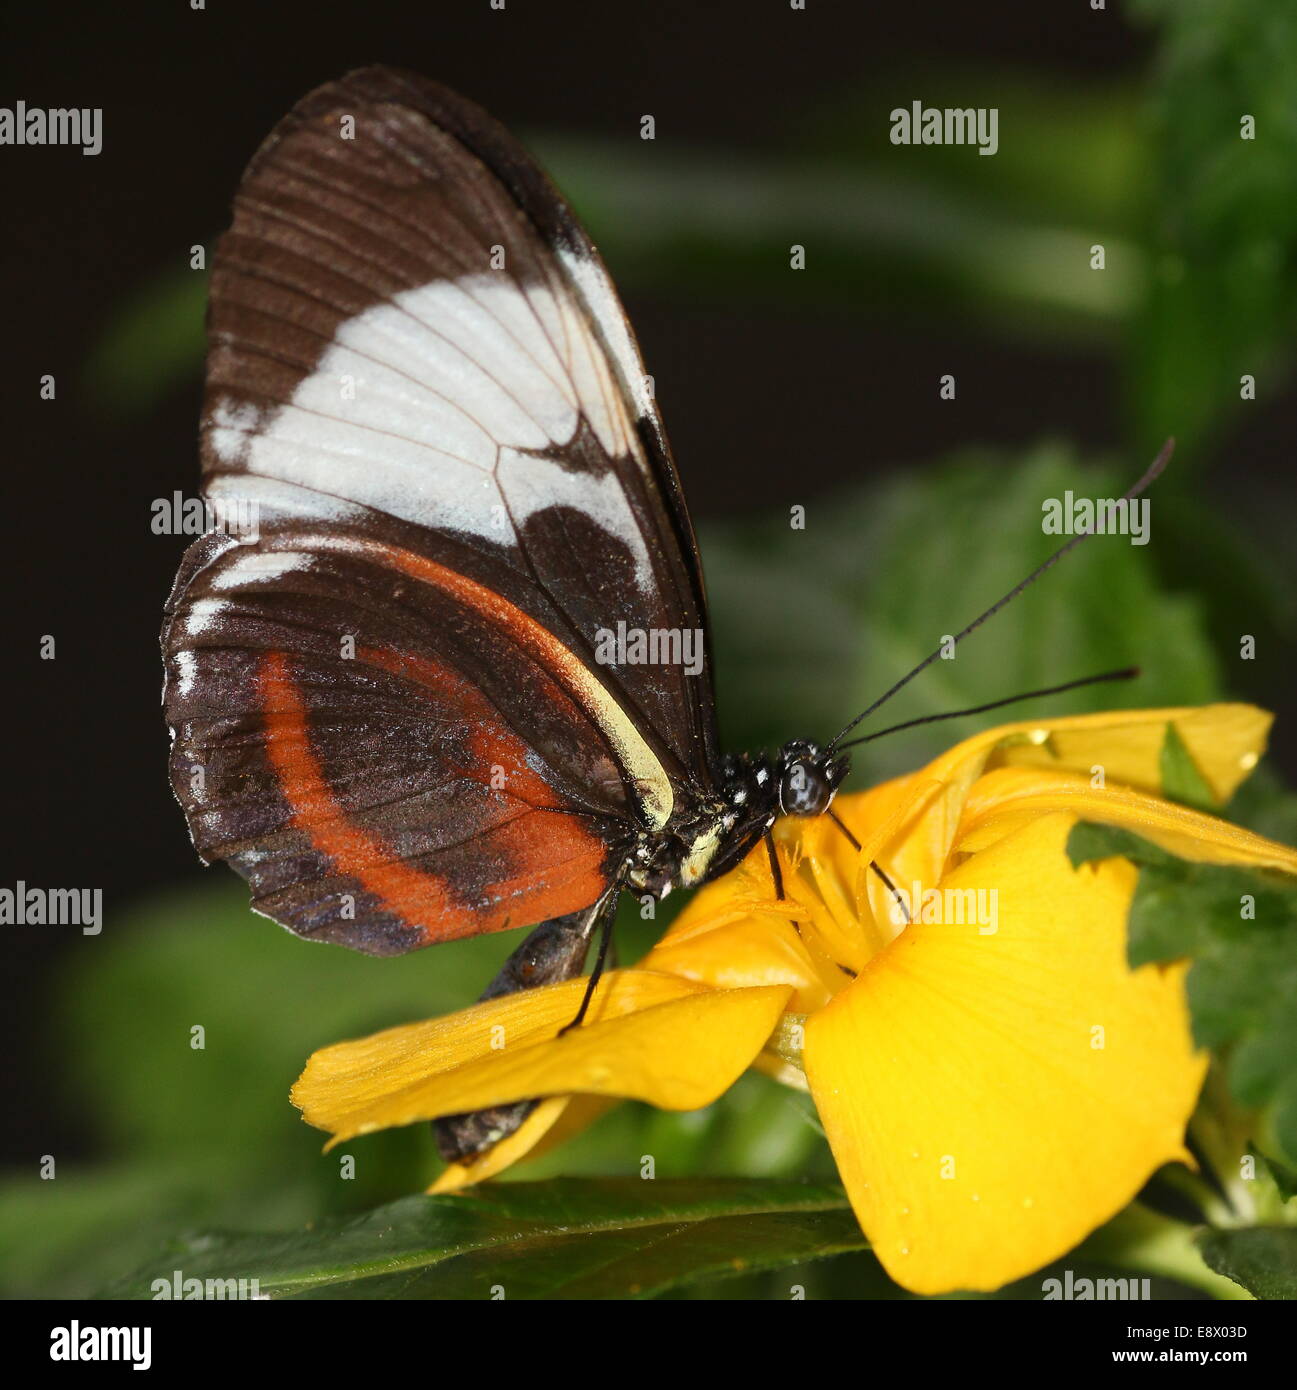 Cydno Longwing butterfly (Heliconius Cydno) a.k.a. Grinning Heliconian or Blue and White Longwing, feeding on a yellow flower Stock Photo